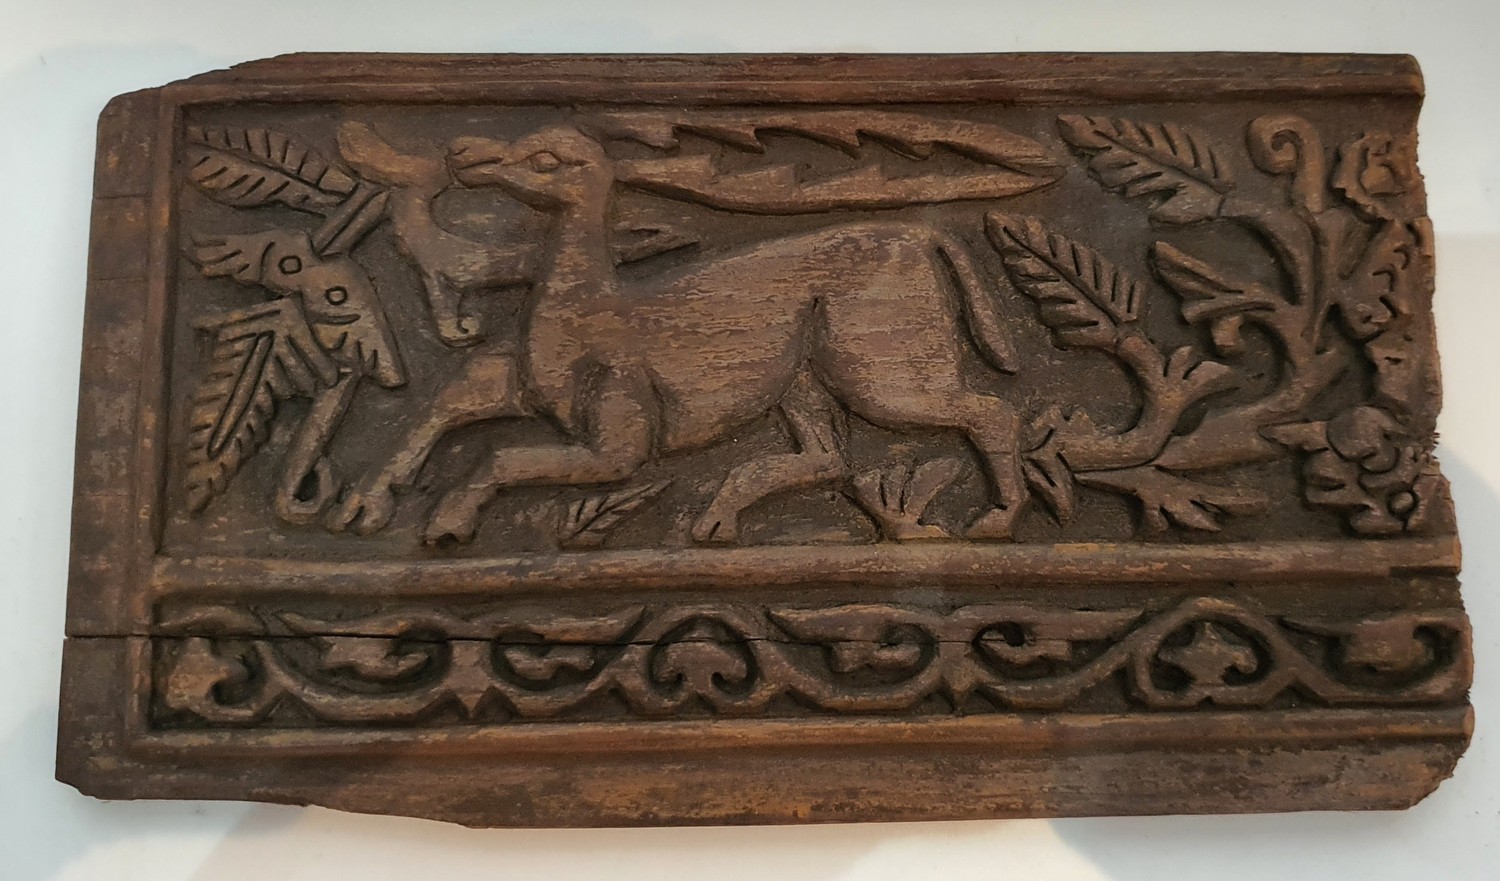 A Fatimid Islamic carved wooden plaque, depicting a stylized deer among foliage with a scrolling - Image 2 of 3